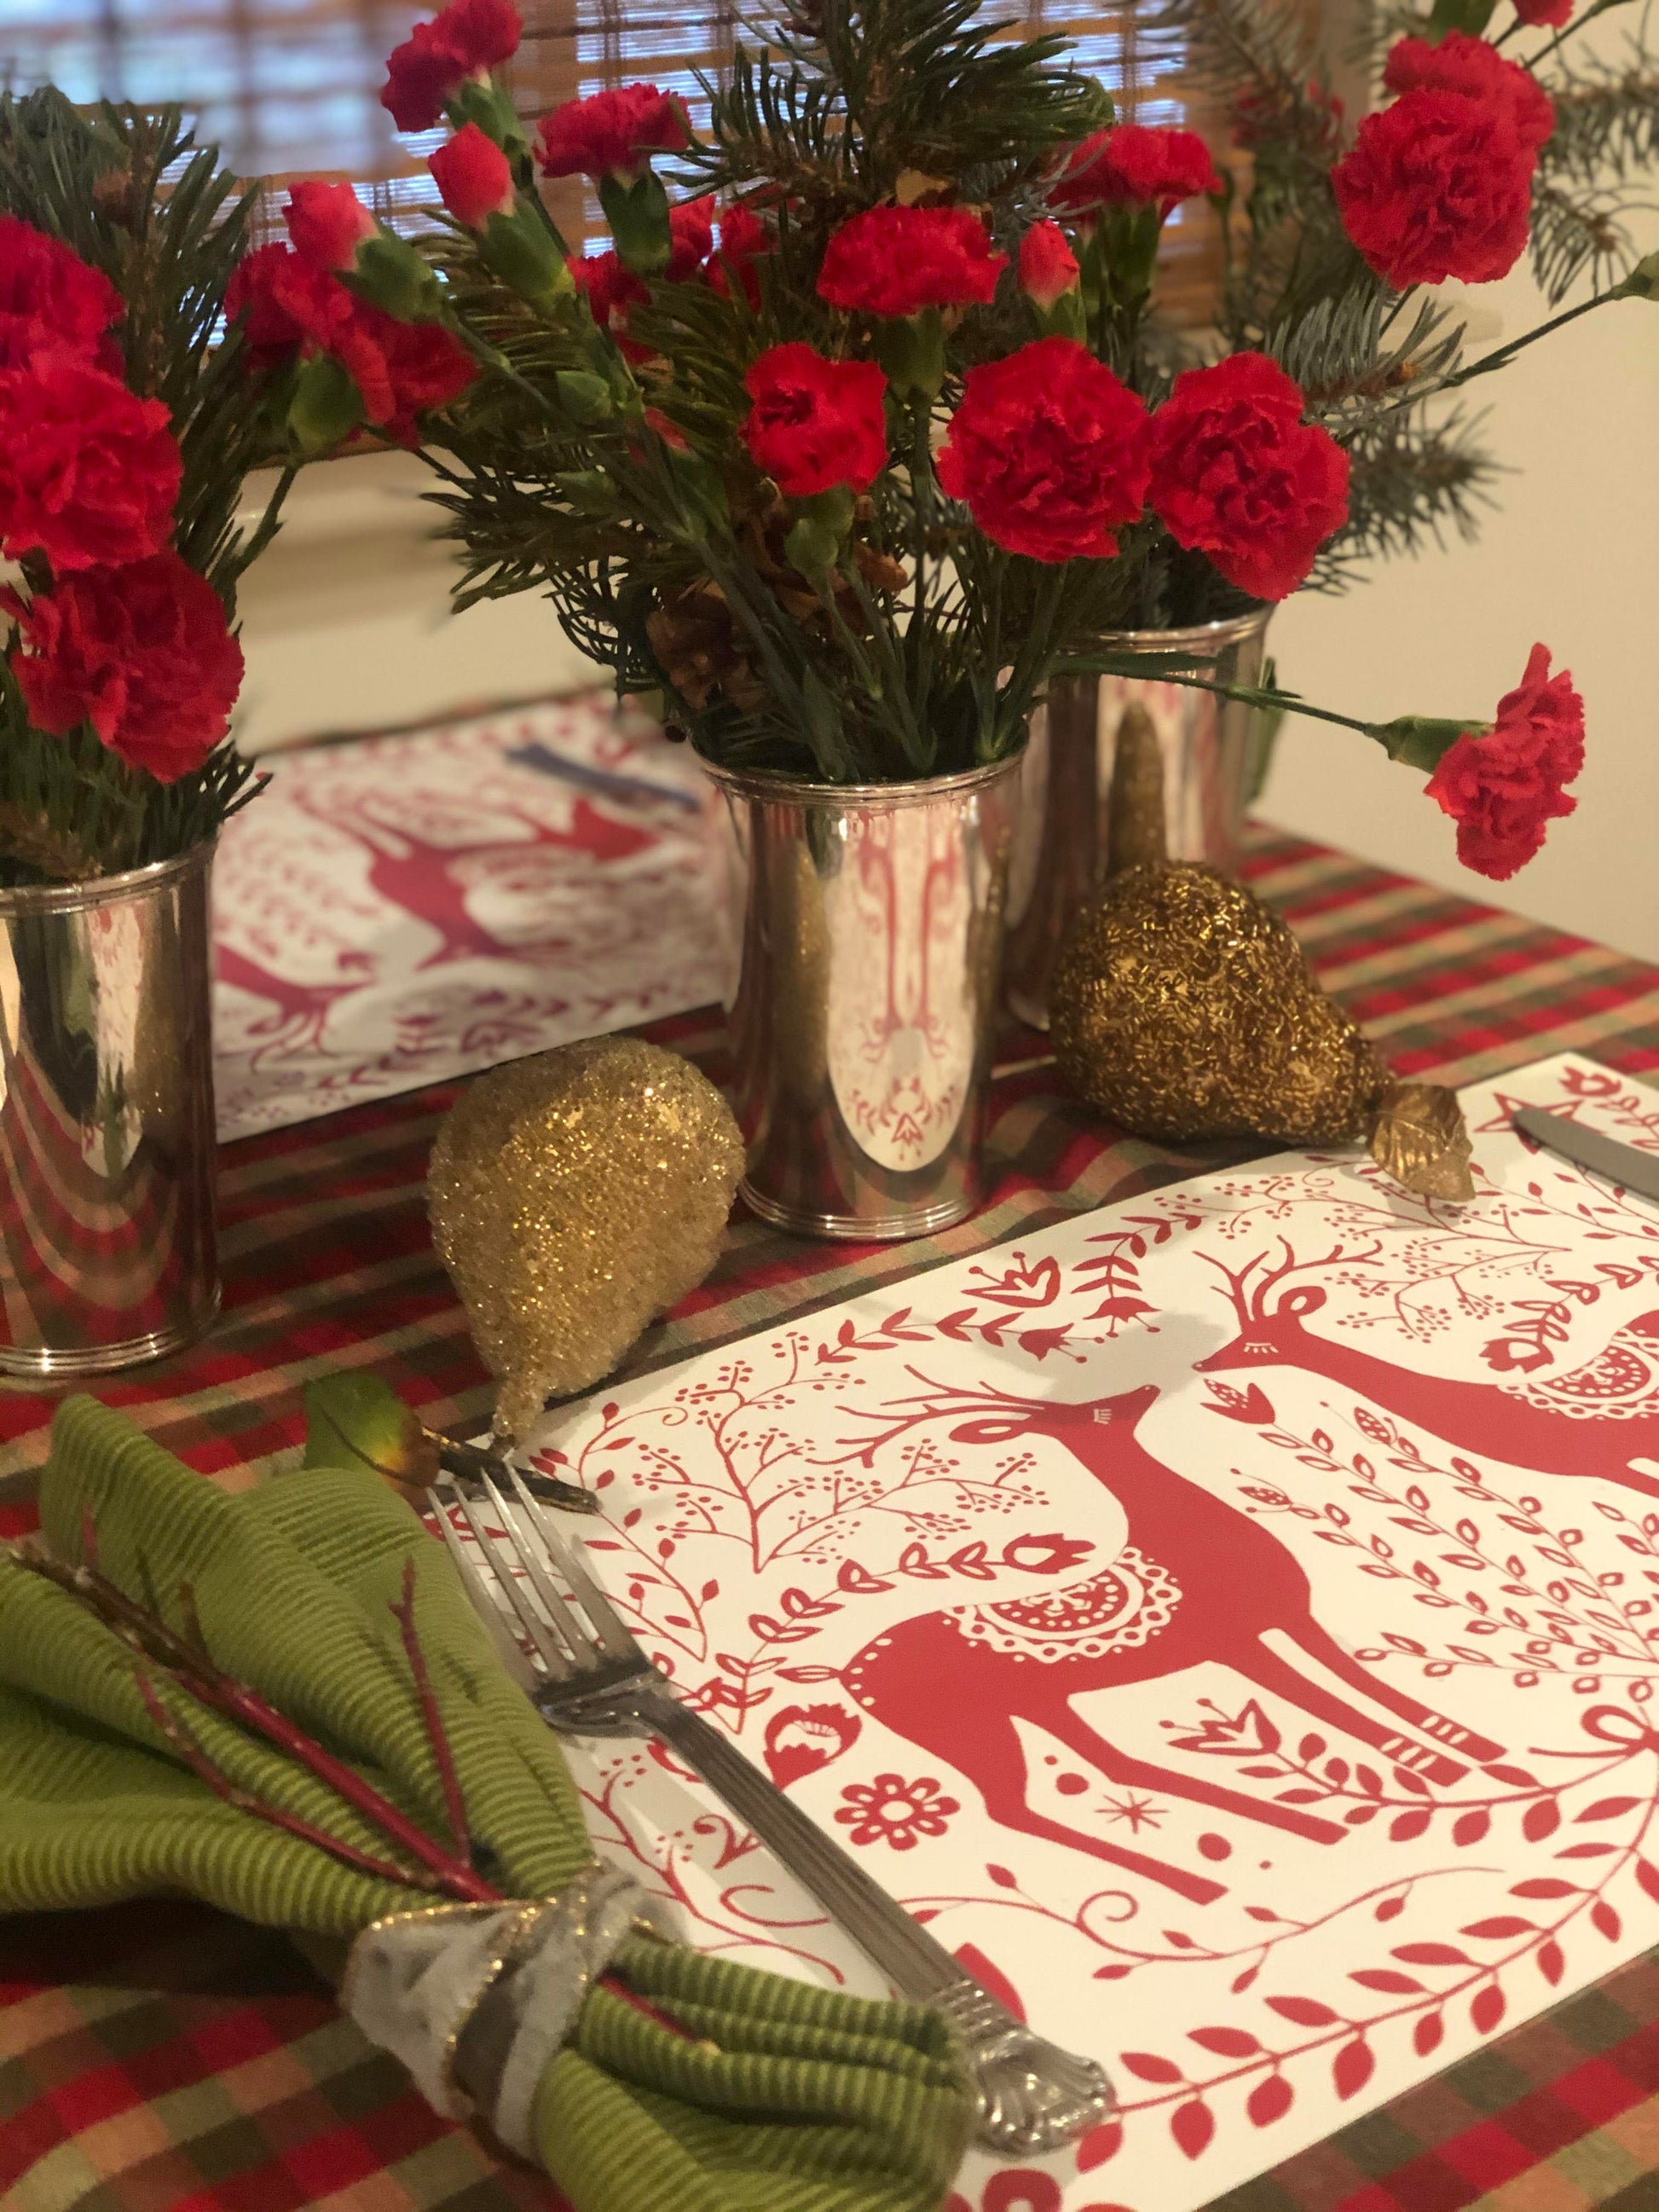 Christmas place setting with red and whiteReindeer Paper Placemats and red flowers.